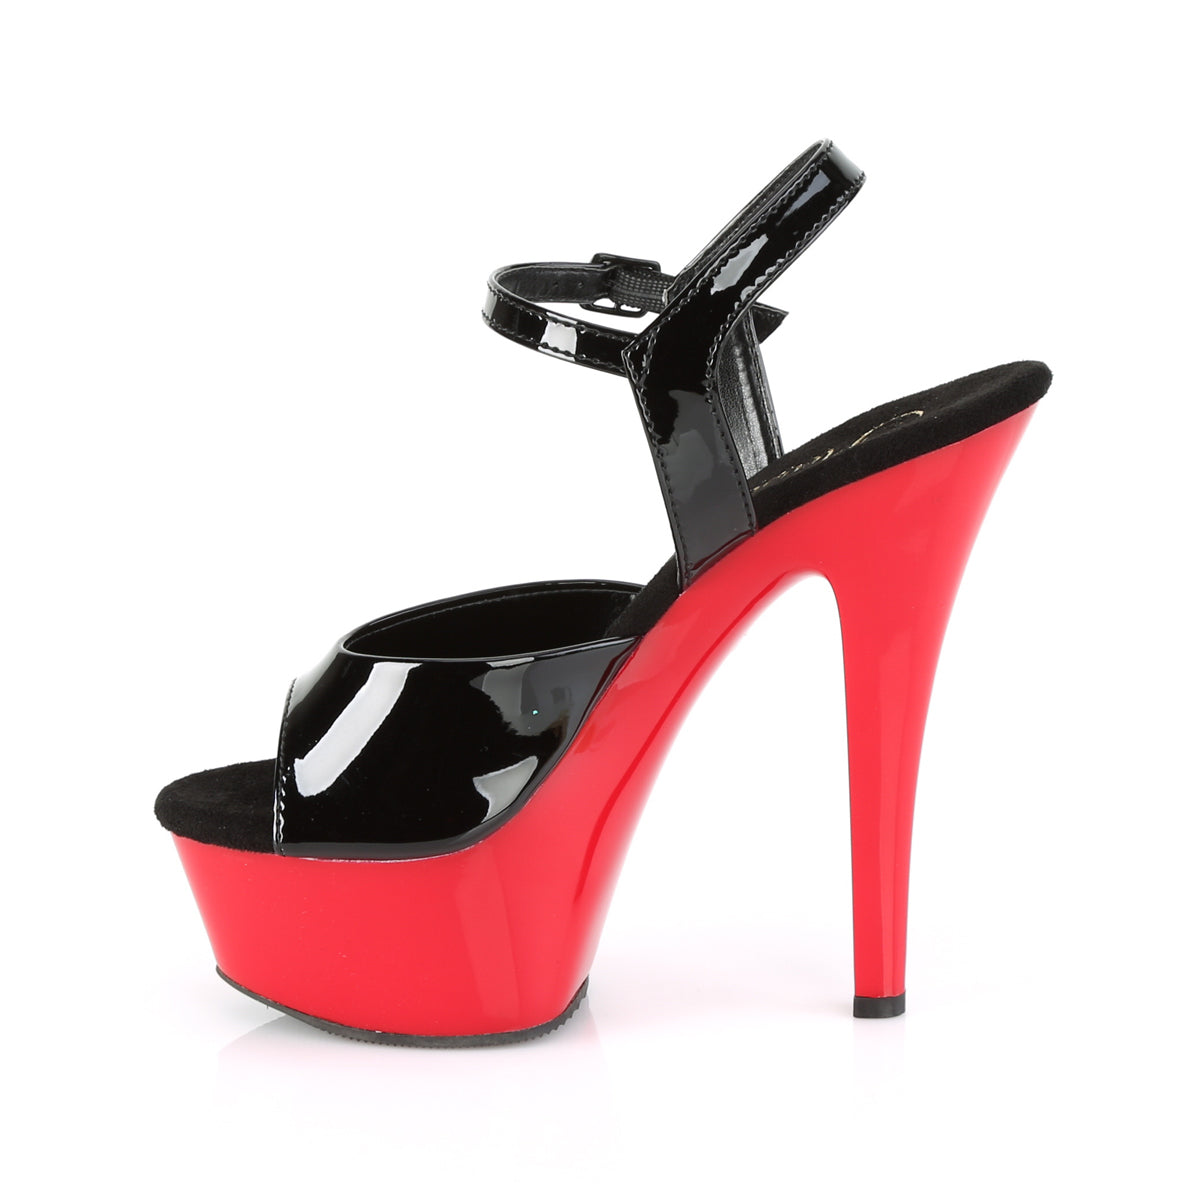 KISS-209 6" Heel Black Patent and Red Pole Dancing Platforms-Pleaser- Sexy Shoes Pole Dance Heels